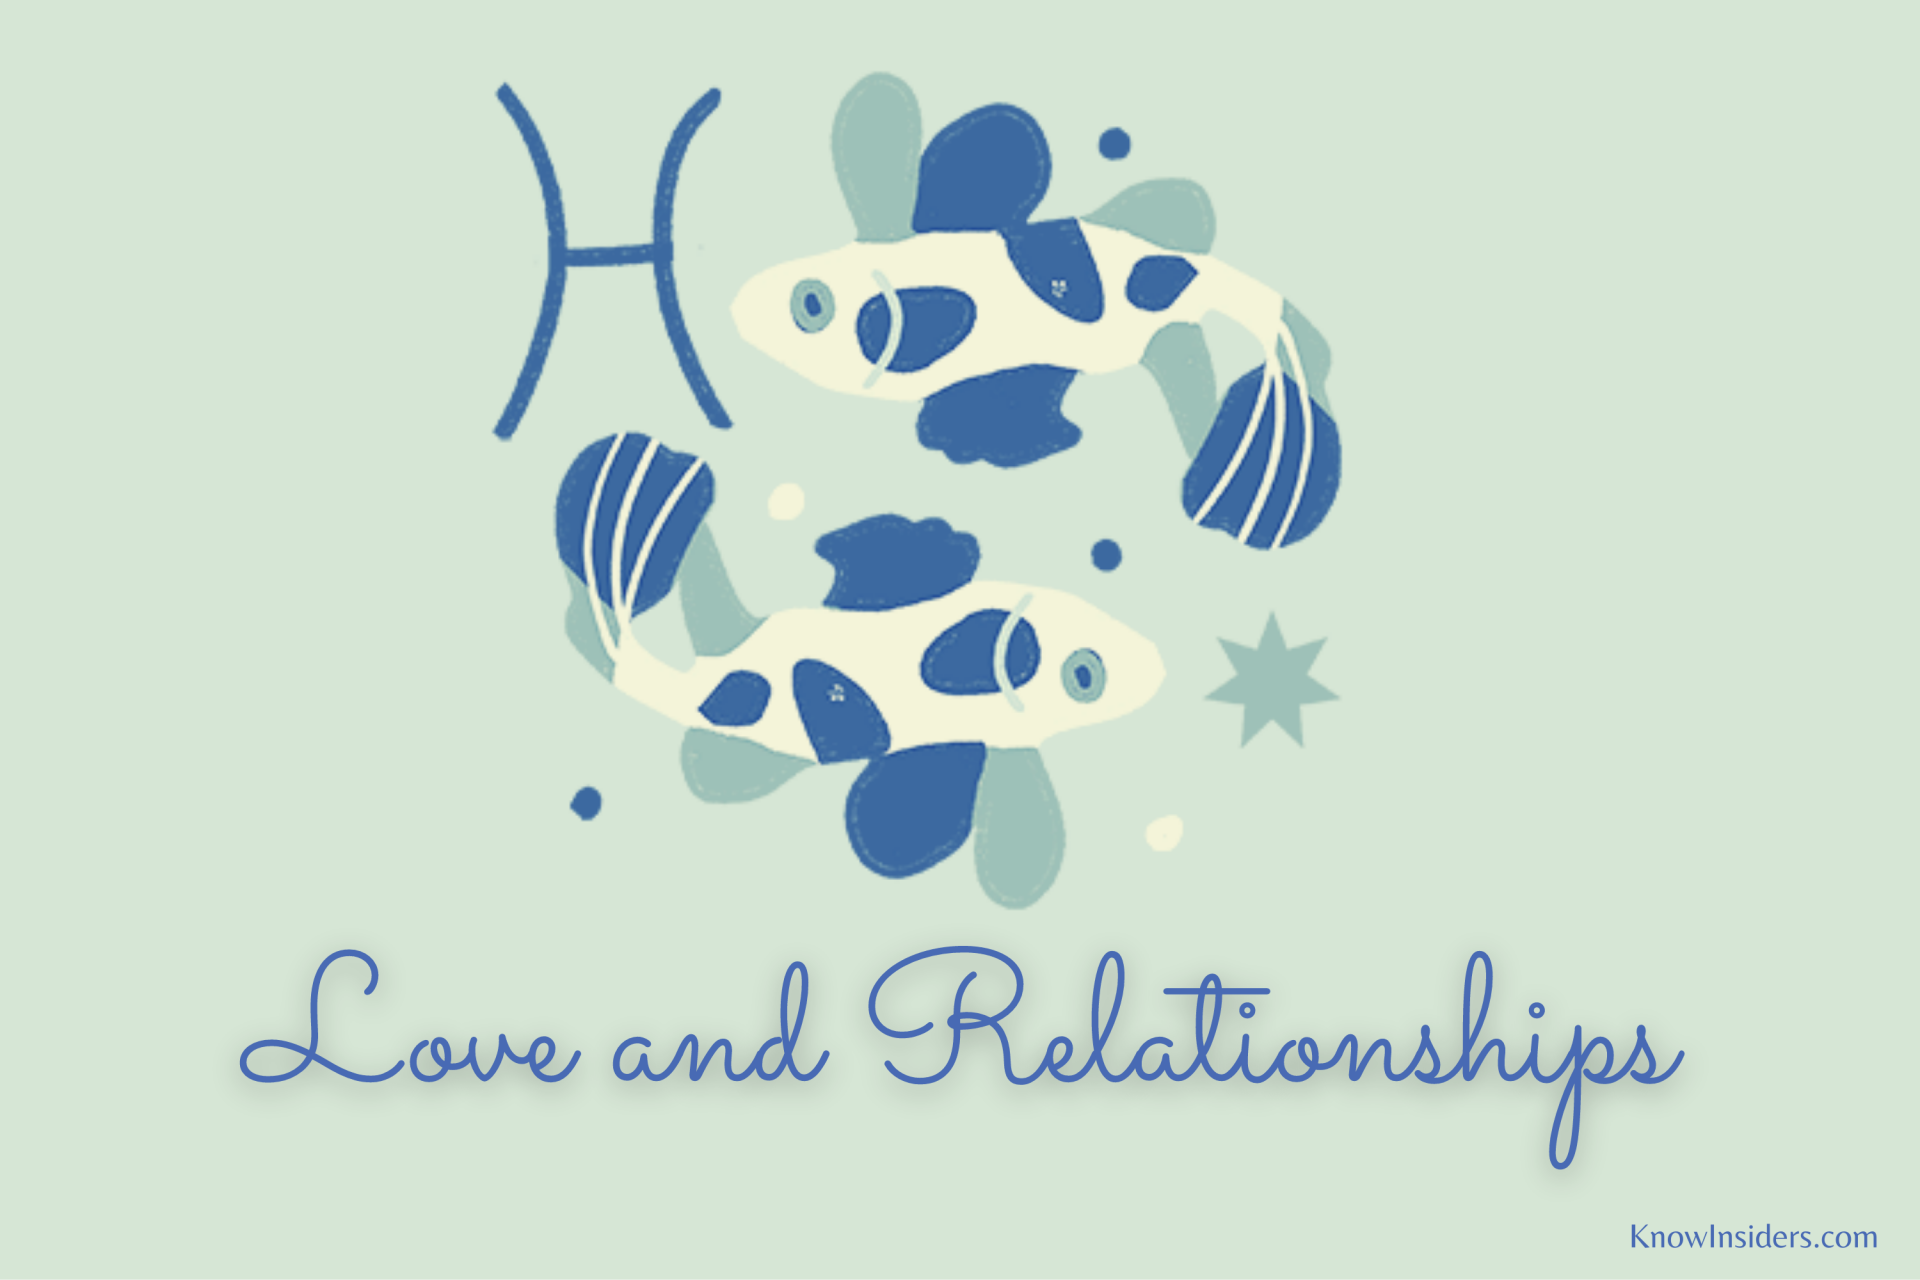 PISCES Horoscope: Astrological Predictions for Love, Family and Relationship